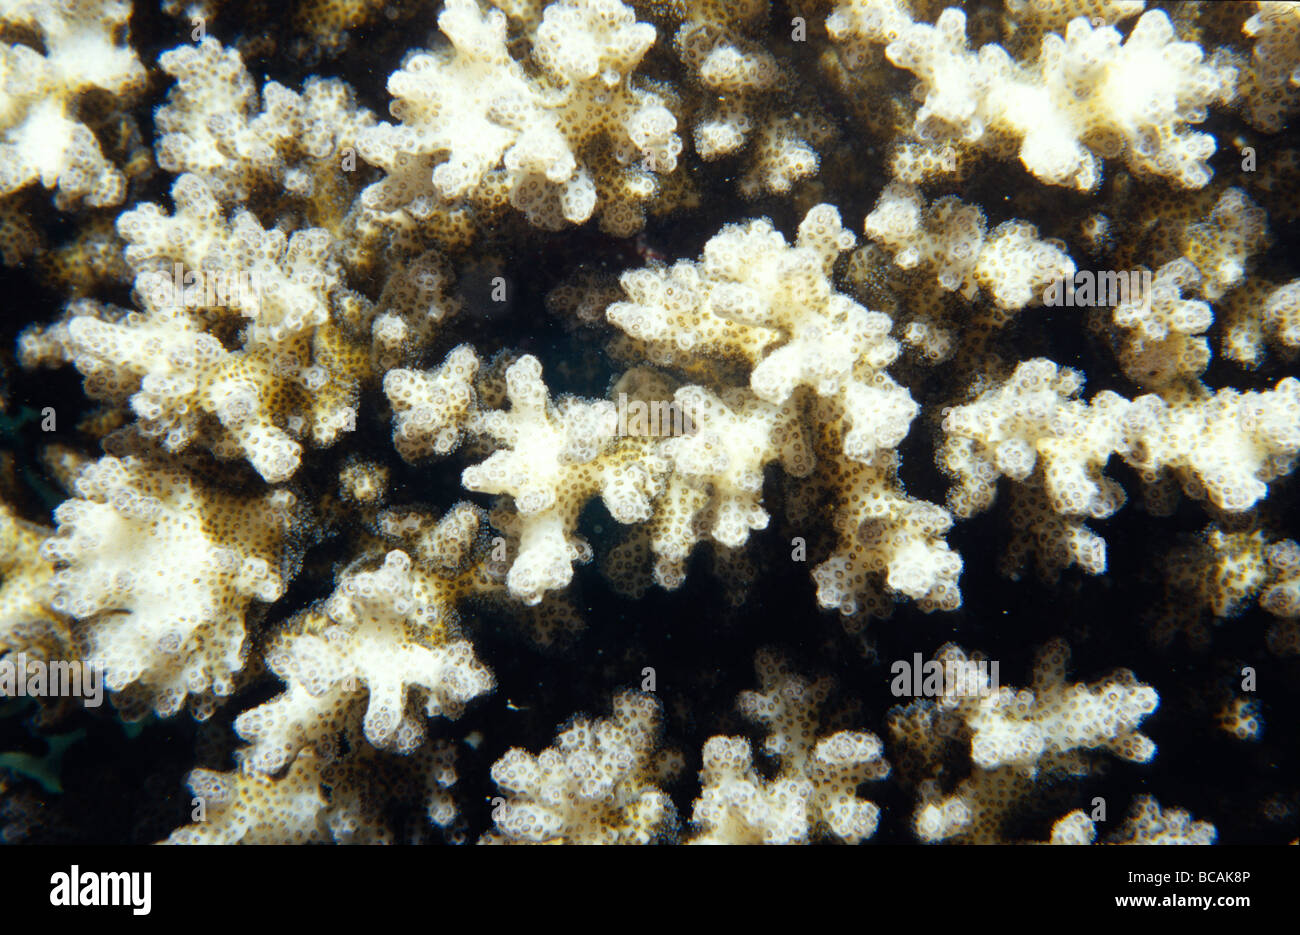 The hard white brittle surface of the Pocillopora Coral. Stock Photo